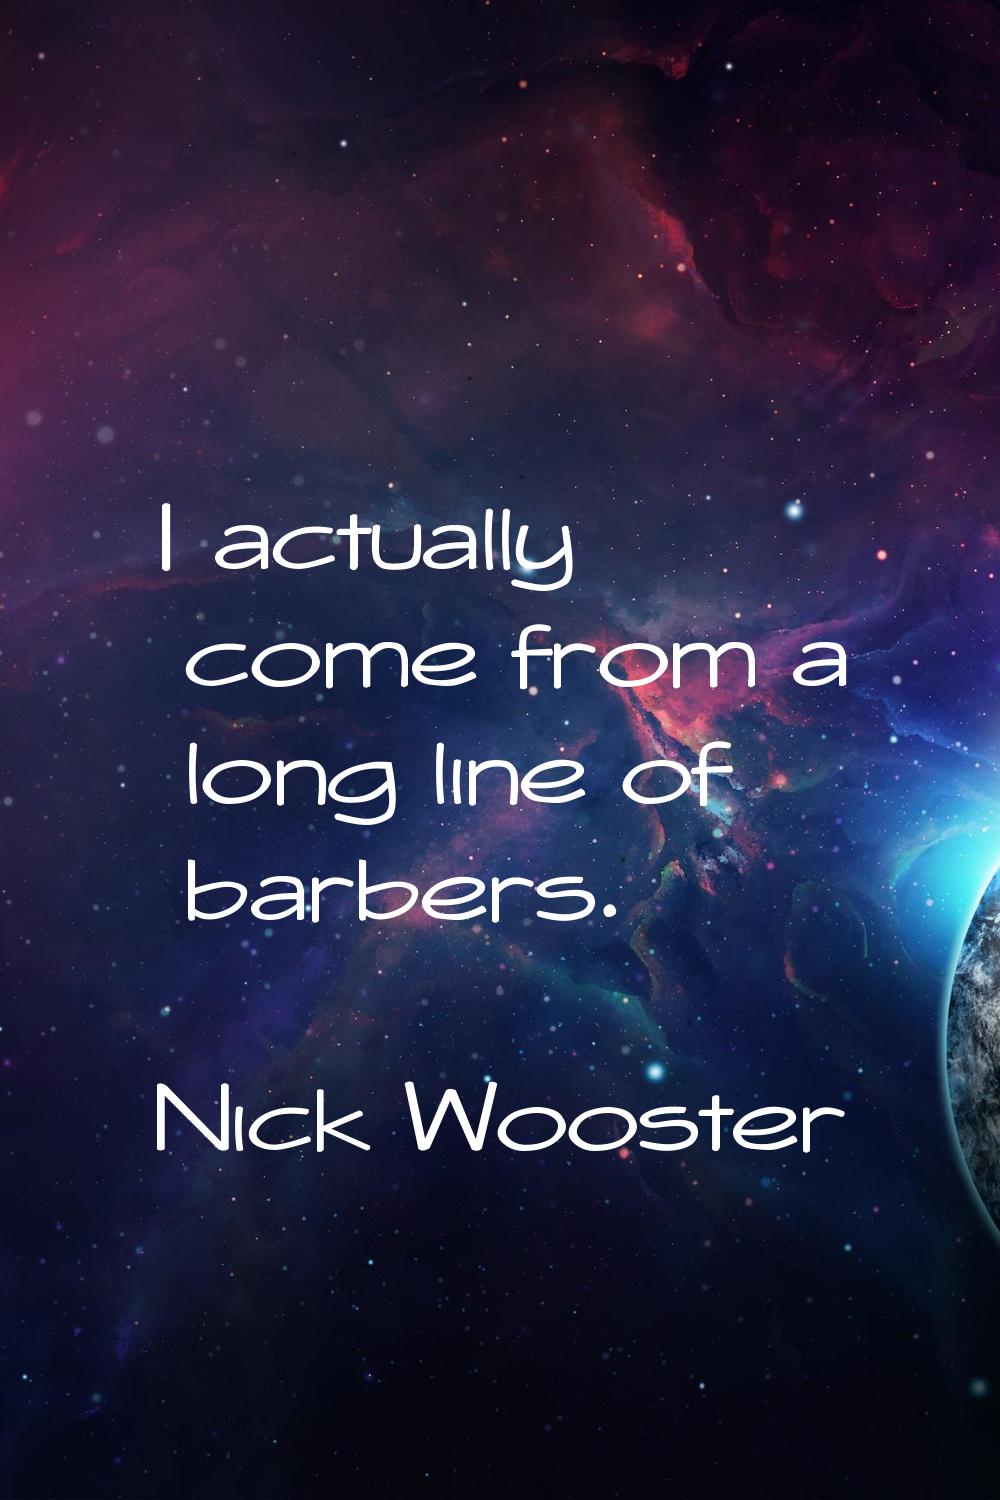 I actually come from a long line of barbers.